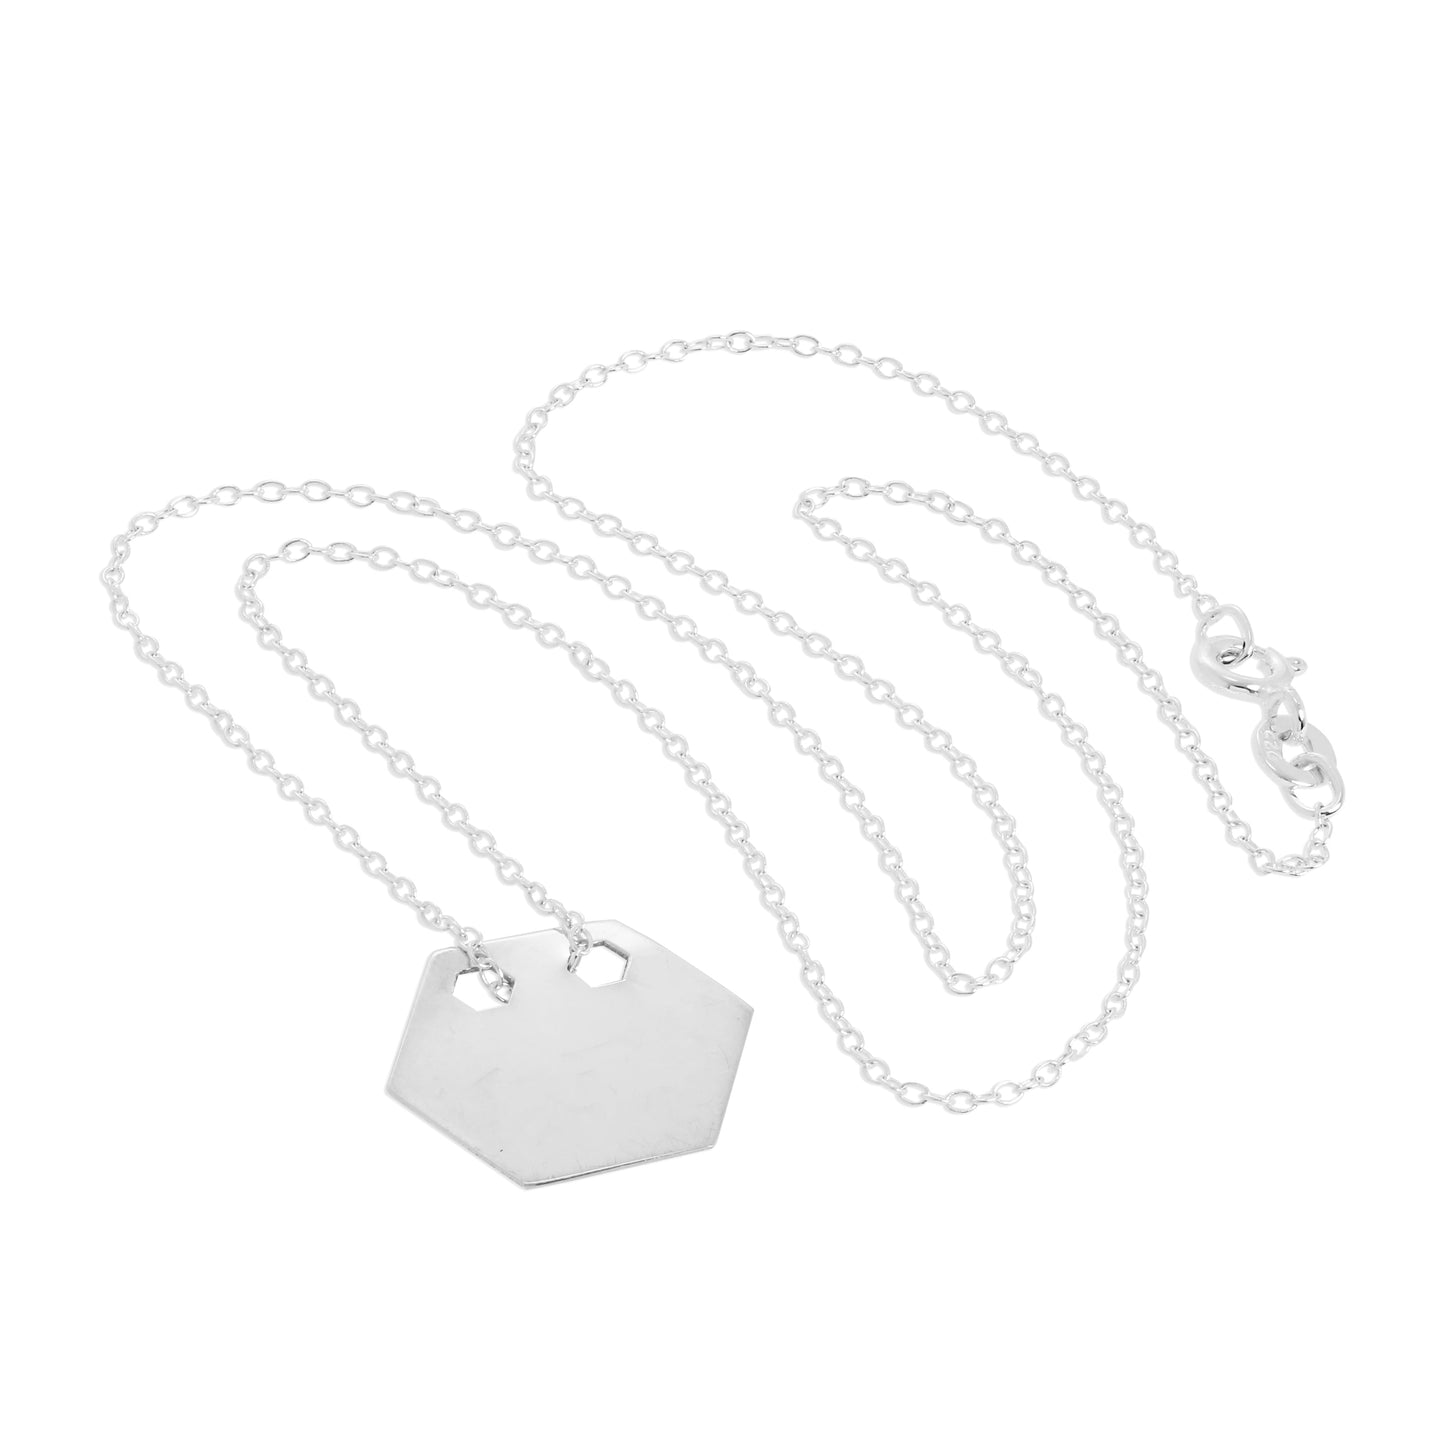 Sterling Silver Engravable Flat Hexagon Pendant Necklace 14 - 22 Inches